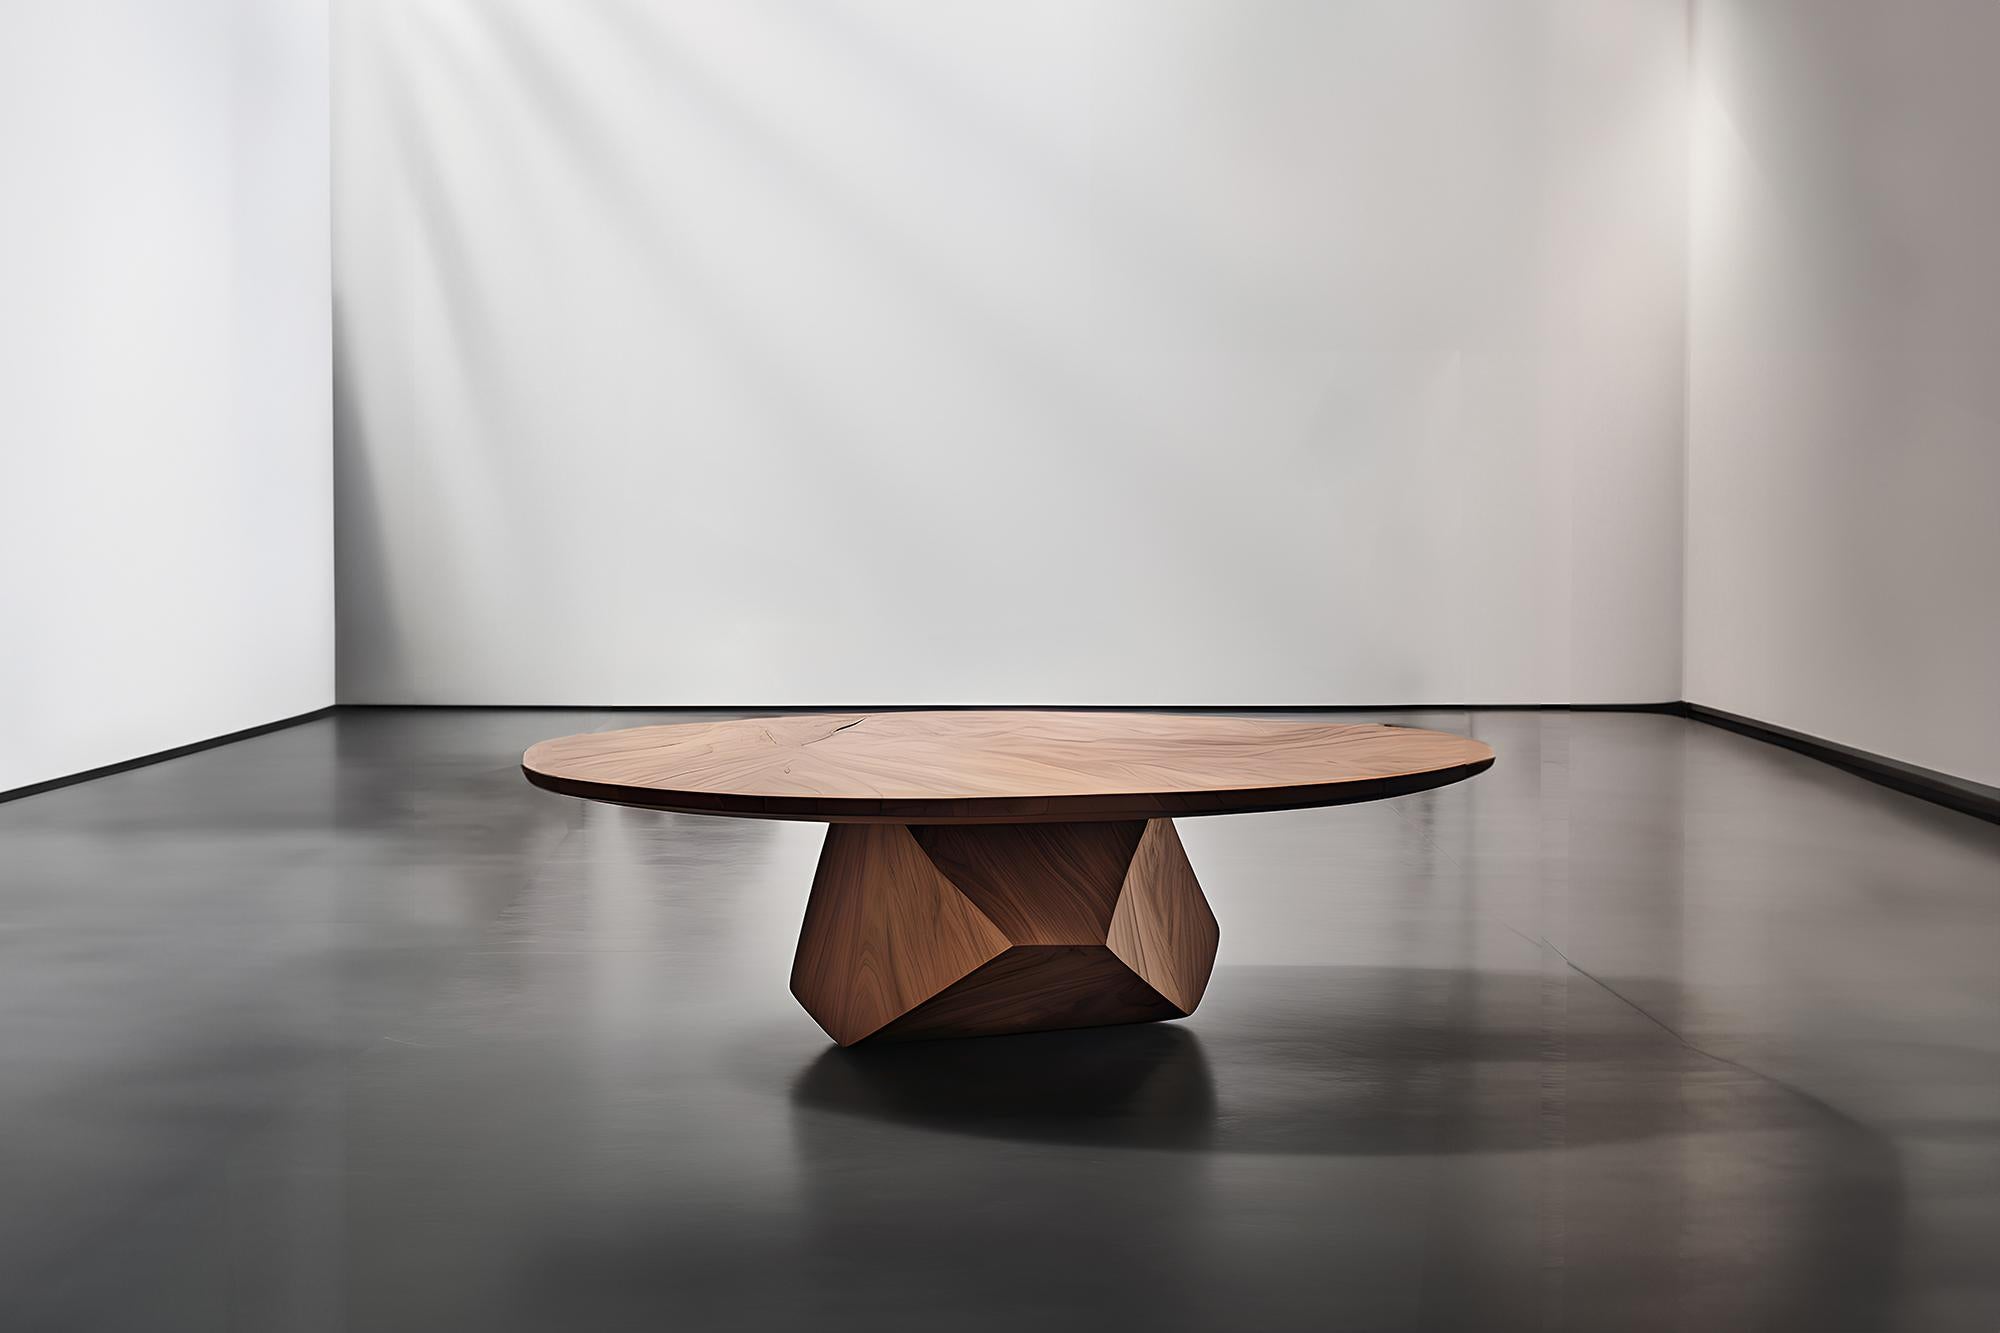 Sculptural Coffee Table Made of Solid Wood, Center Table Solace S39 by Joel Escalona


The Solace table series, designed by Joel Escalona, is a furniture collection that exudes balance and presence, thanks to its sensuous, dense, and irregular